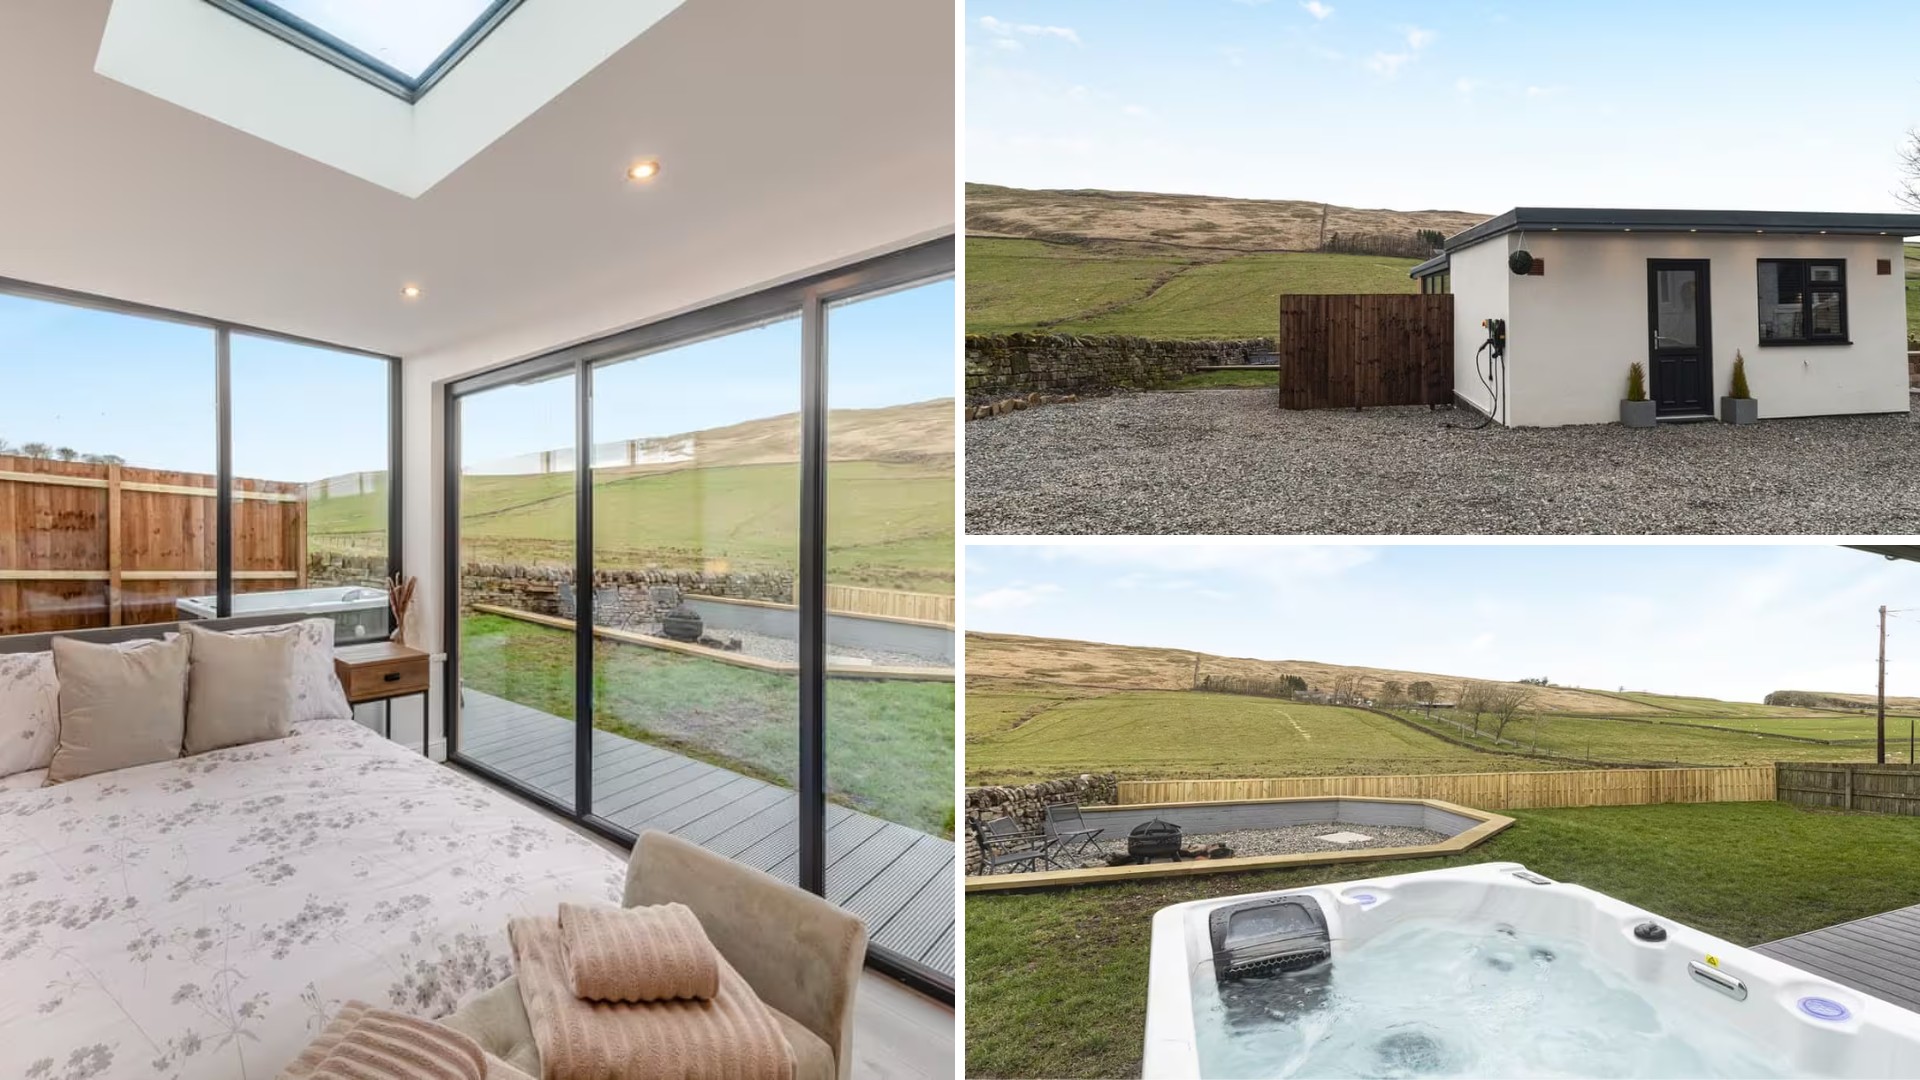 the image is made of three pictures, to the left there is a bed looking out over a field and a fire pit, to the upper right is the holiday accommodation itself - a white building with views of the national park, and to the bottom right is a hot tub with the views out over the national park 